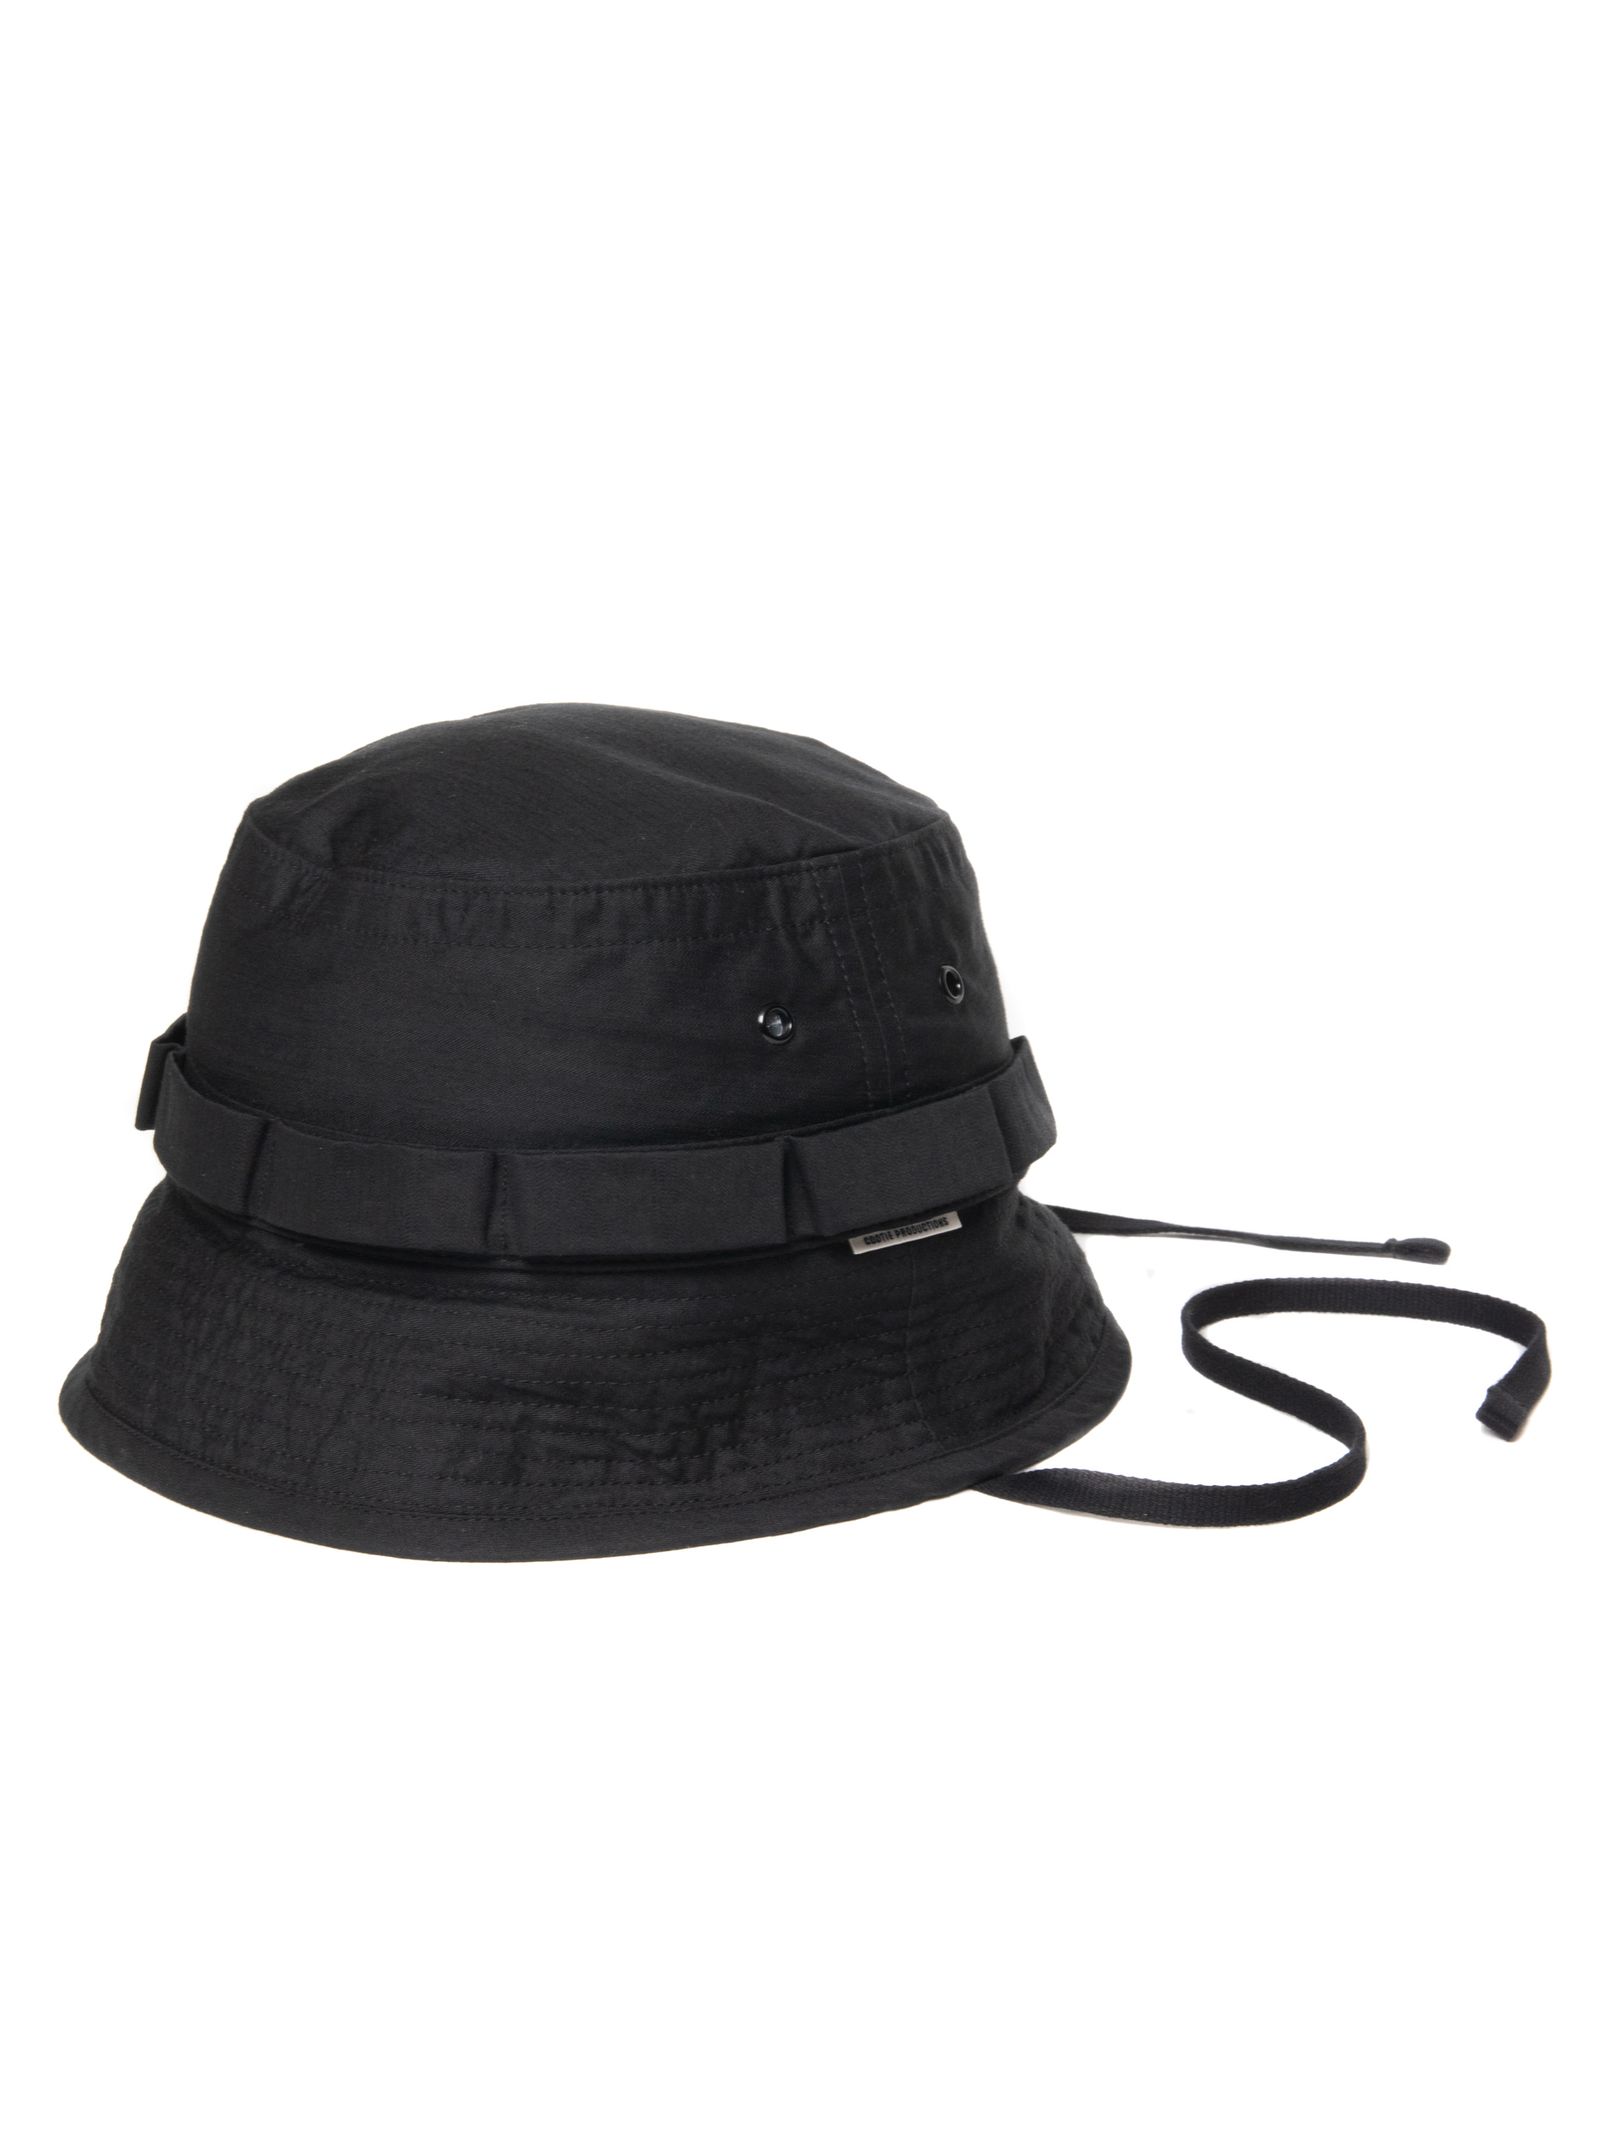 COOTIE PRODUCTIONS - Back Satin Boonie Bucket Hat (BLACK